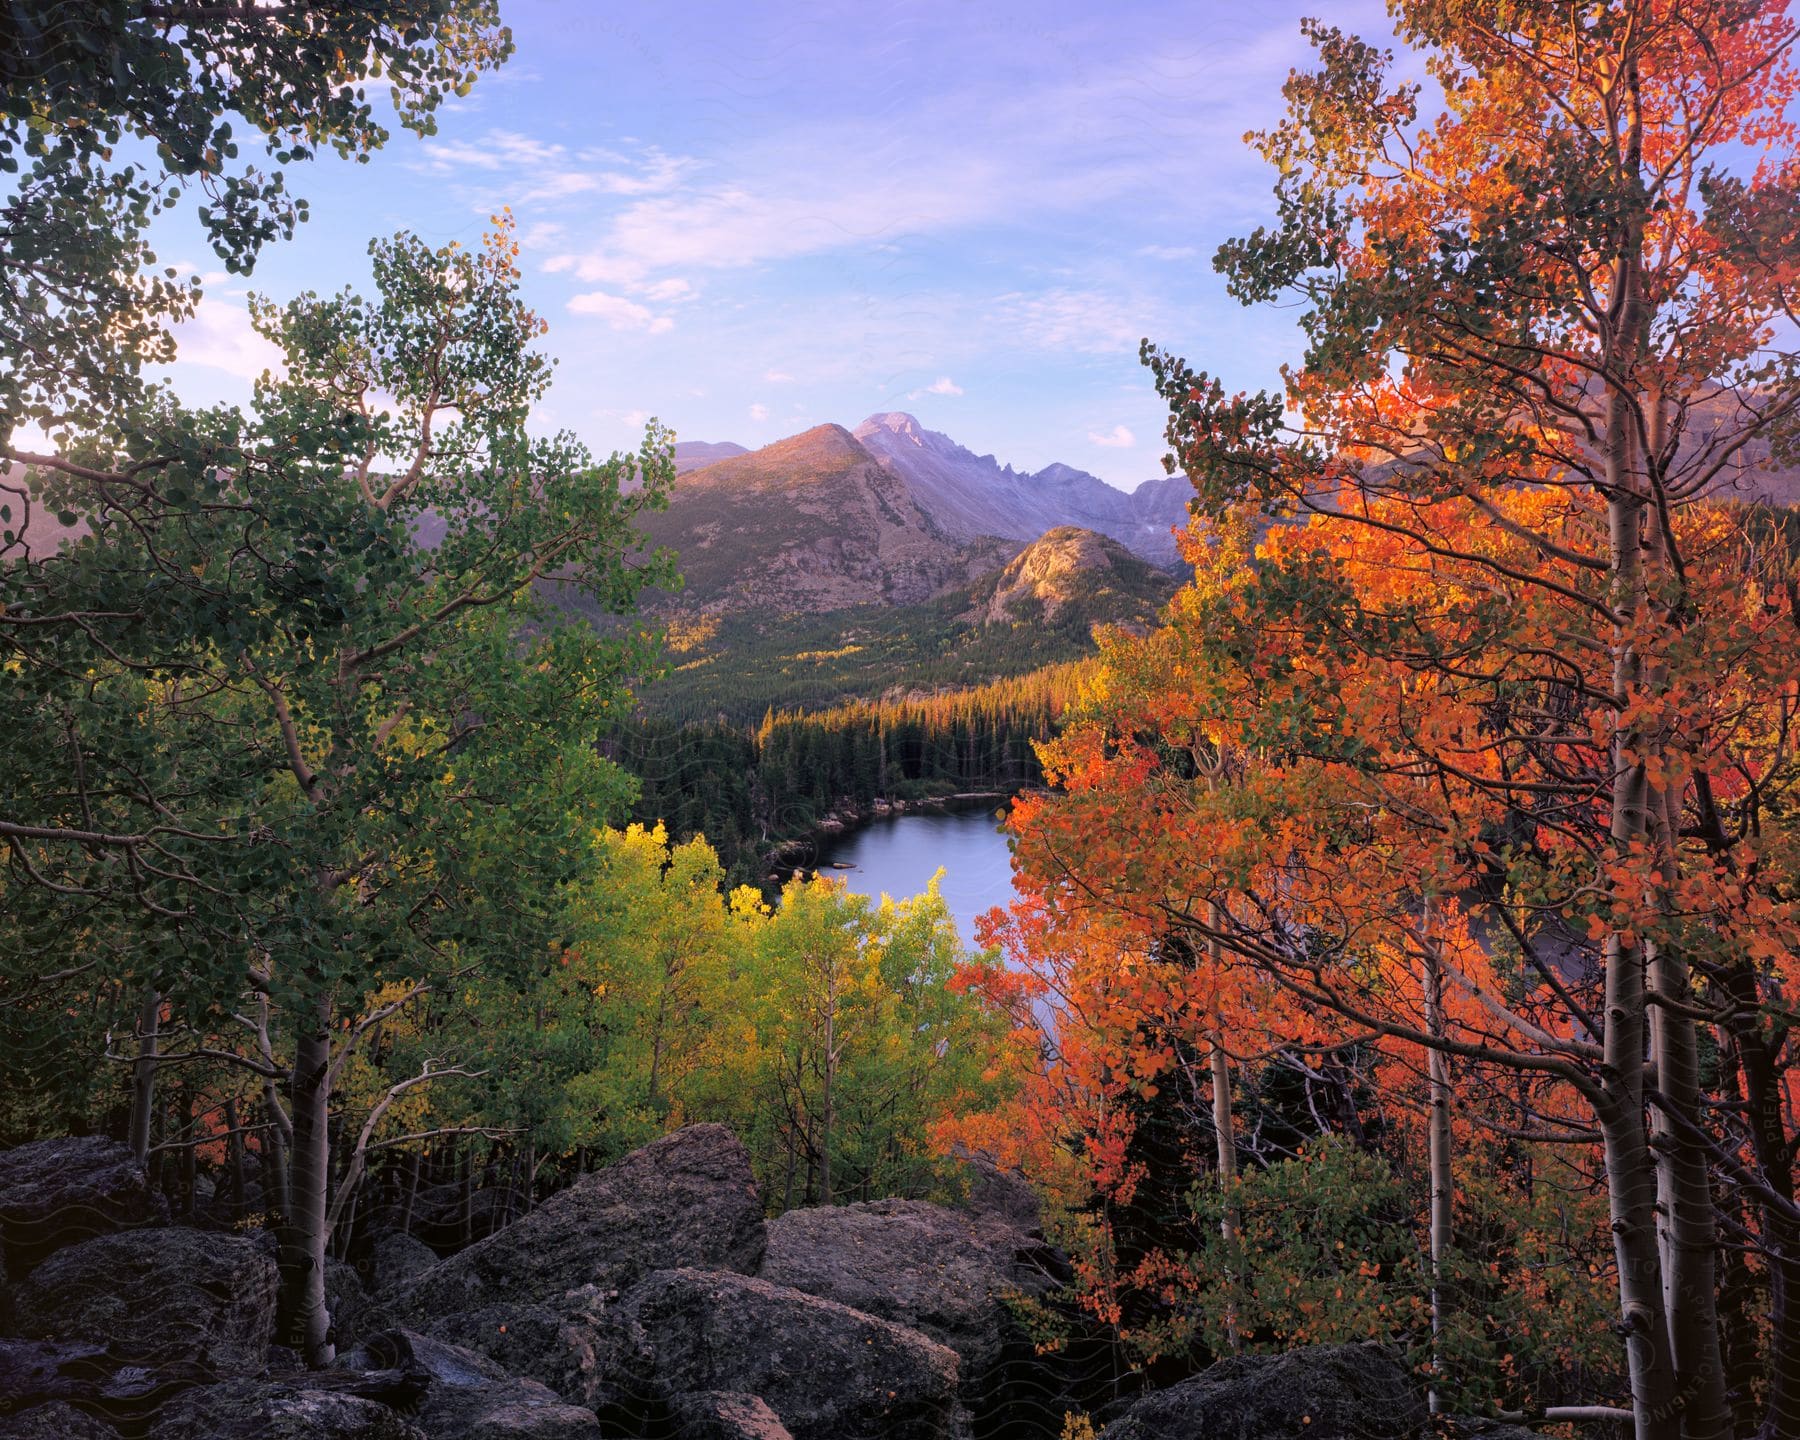 A lake and mountains seen through an autumn forest